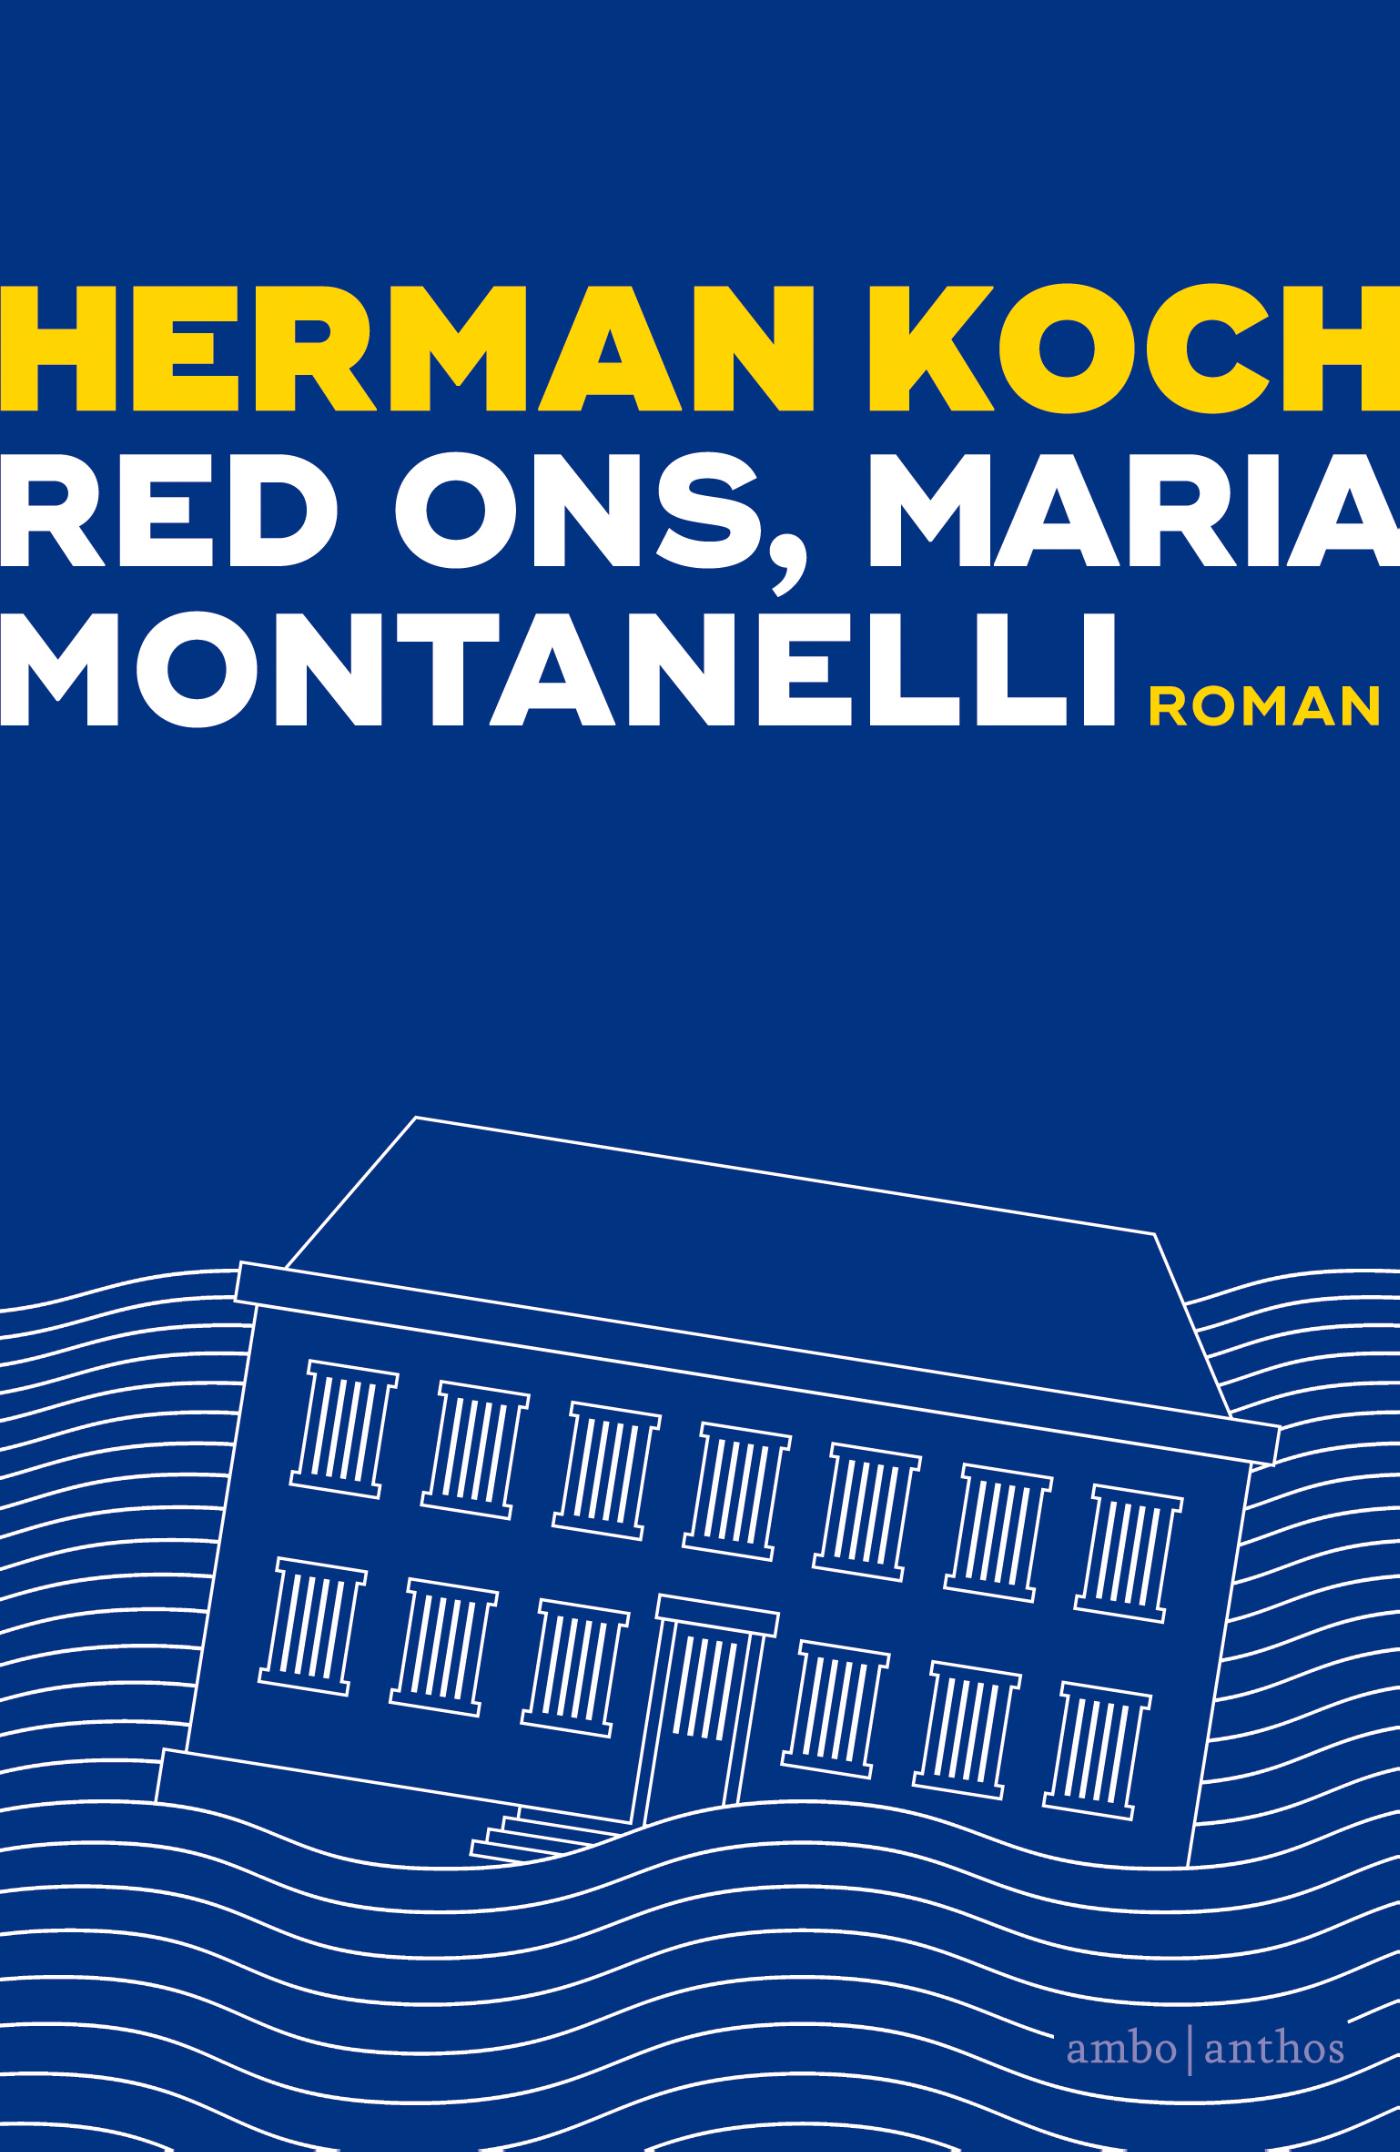 9789026340987-Red-ons-Maria-Montanelli